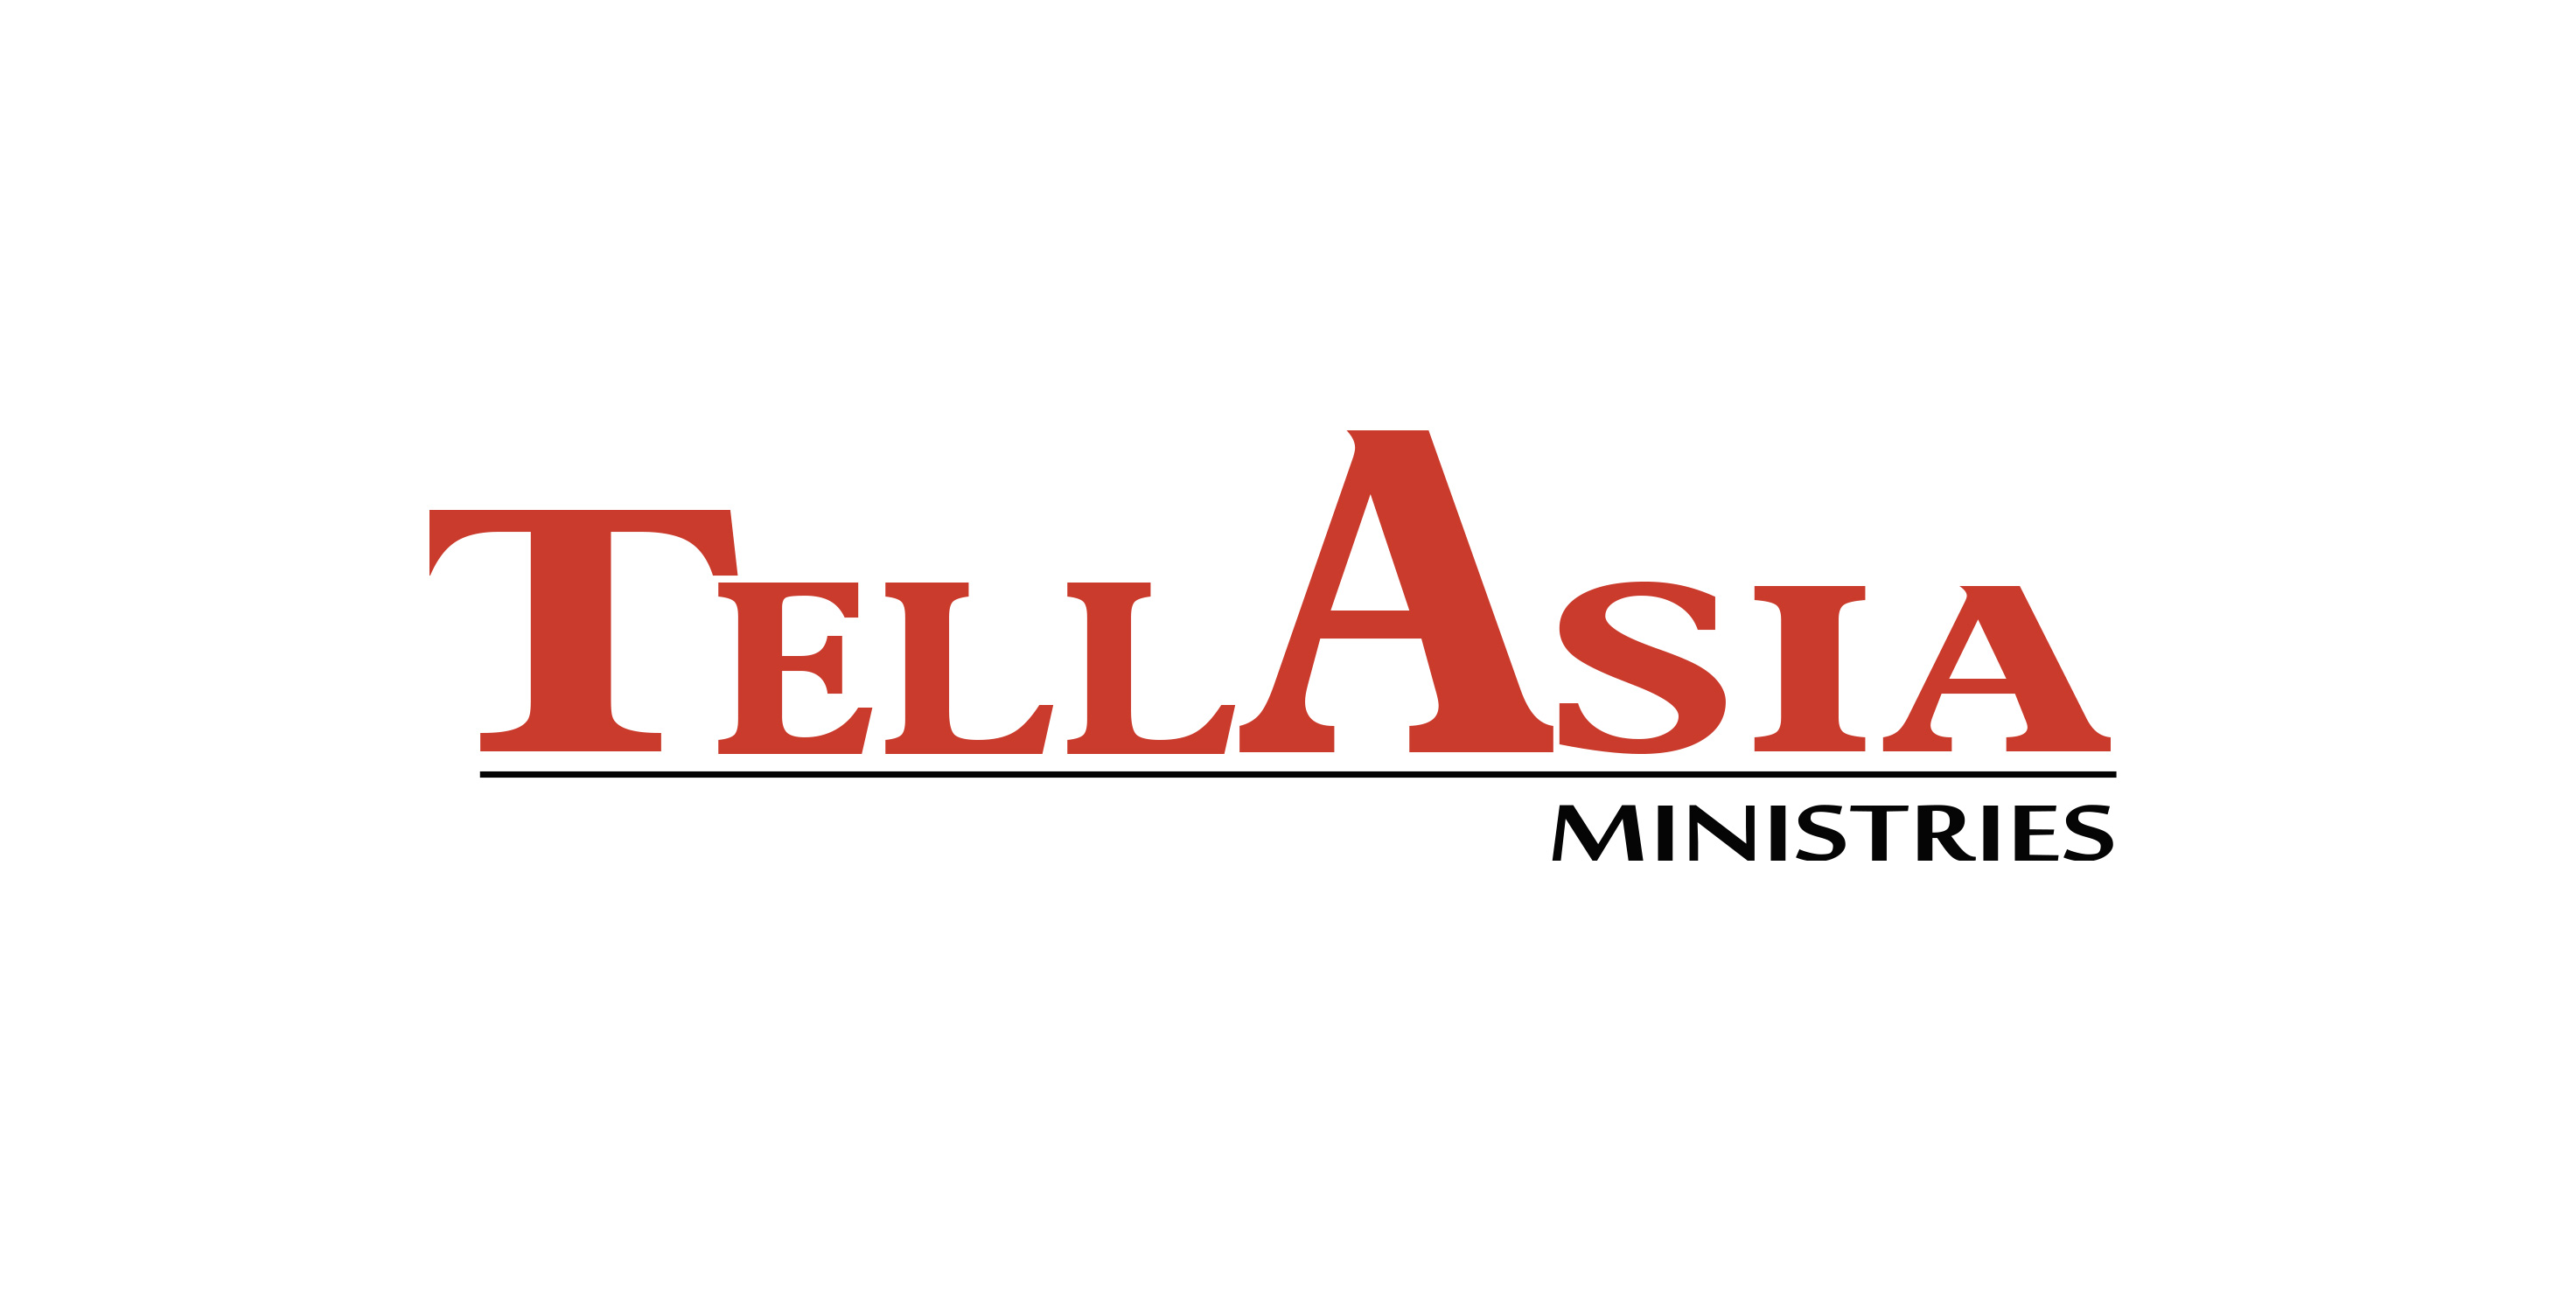 In 1999 Leanna founded TellAsia Ministries with the help of her mom Kathy. The first significant purchase made by TellAsia – a jeep for native Indian leaders to reach distant villages – Leanna funded by selling her last horse. 